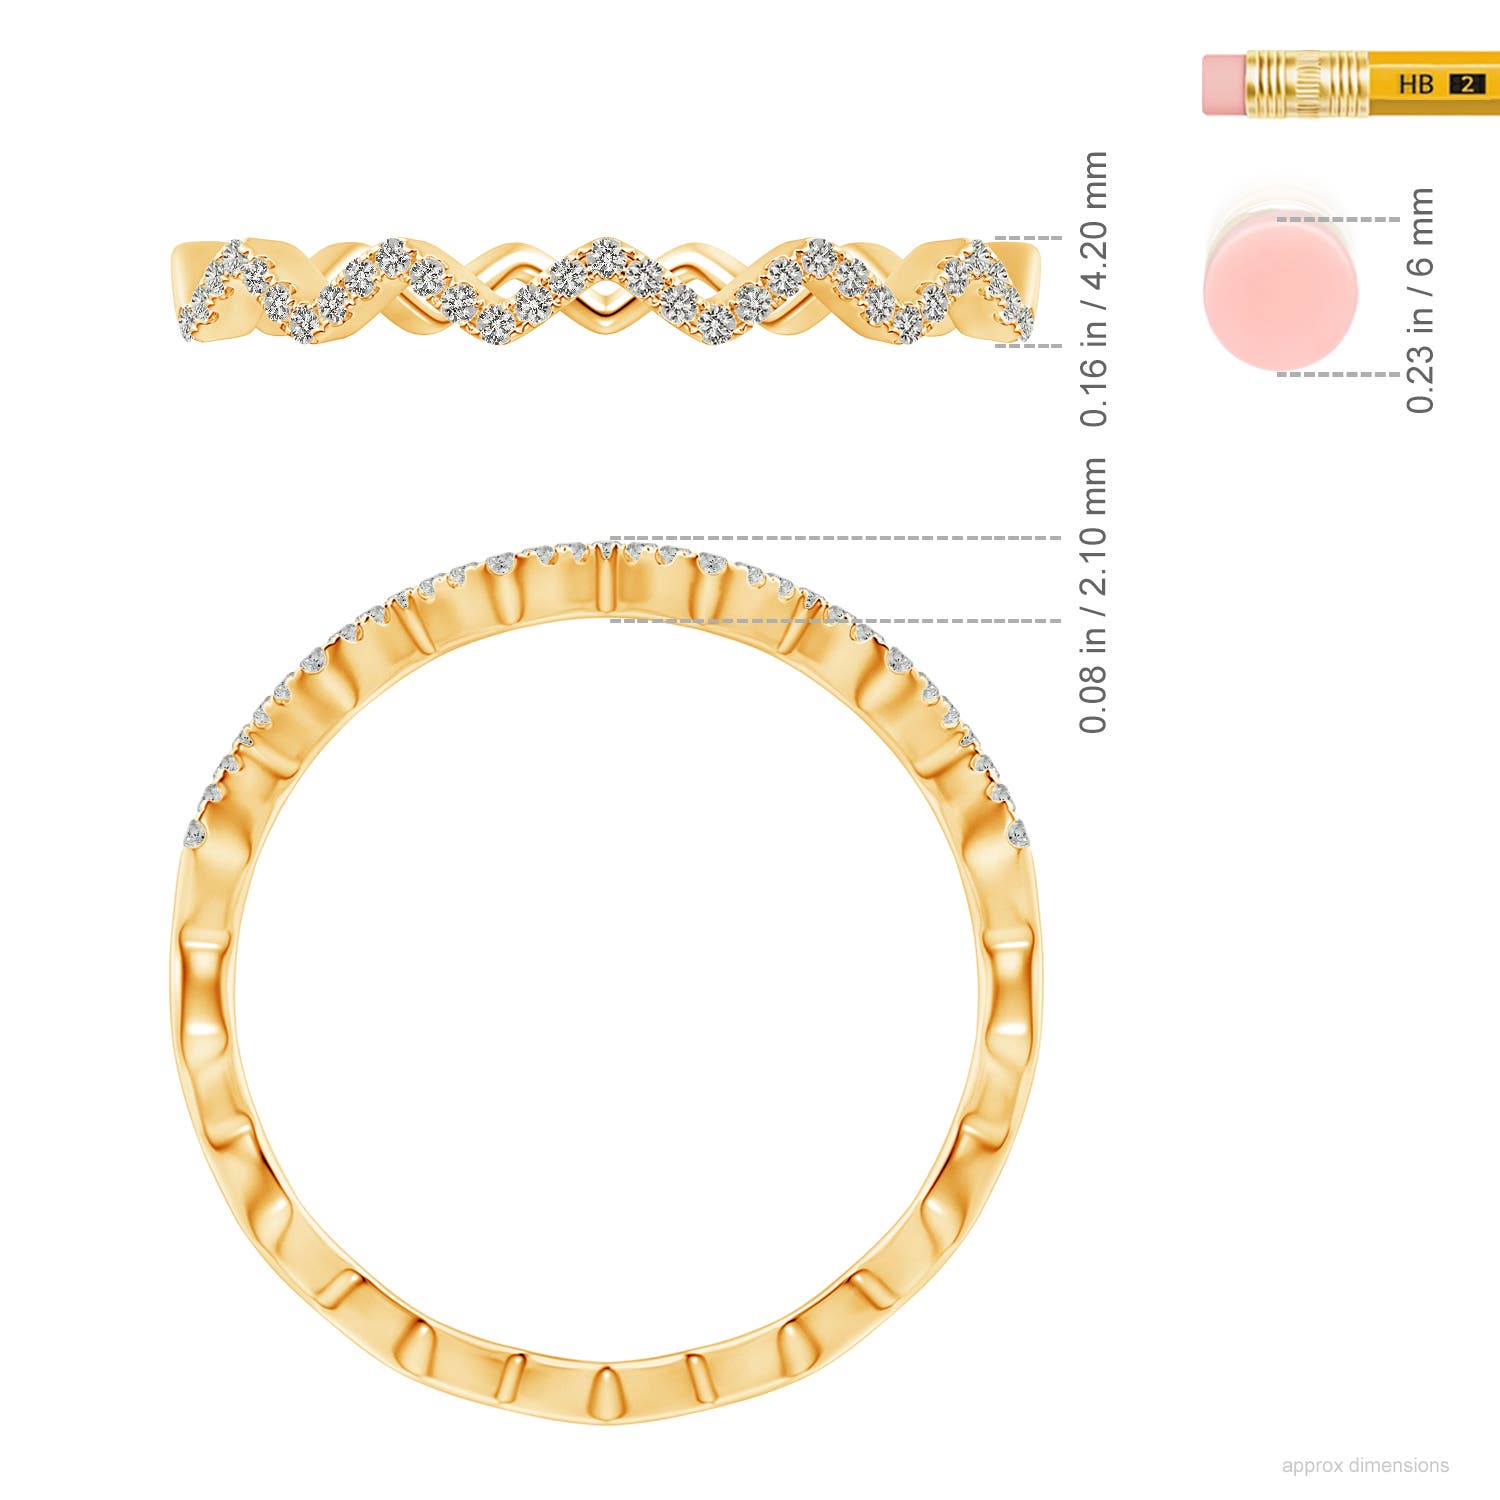 K, I3 / 0.25 CT / 14 KT Yellow Gold